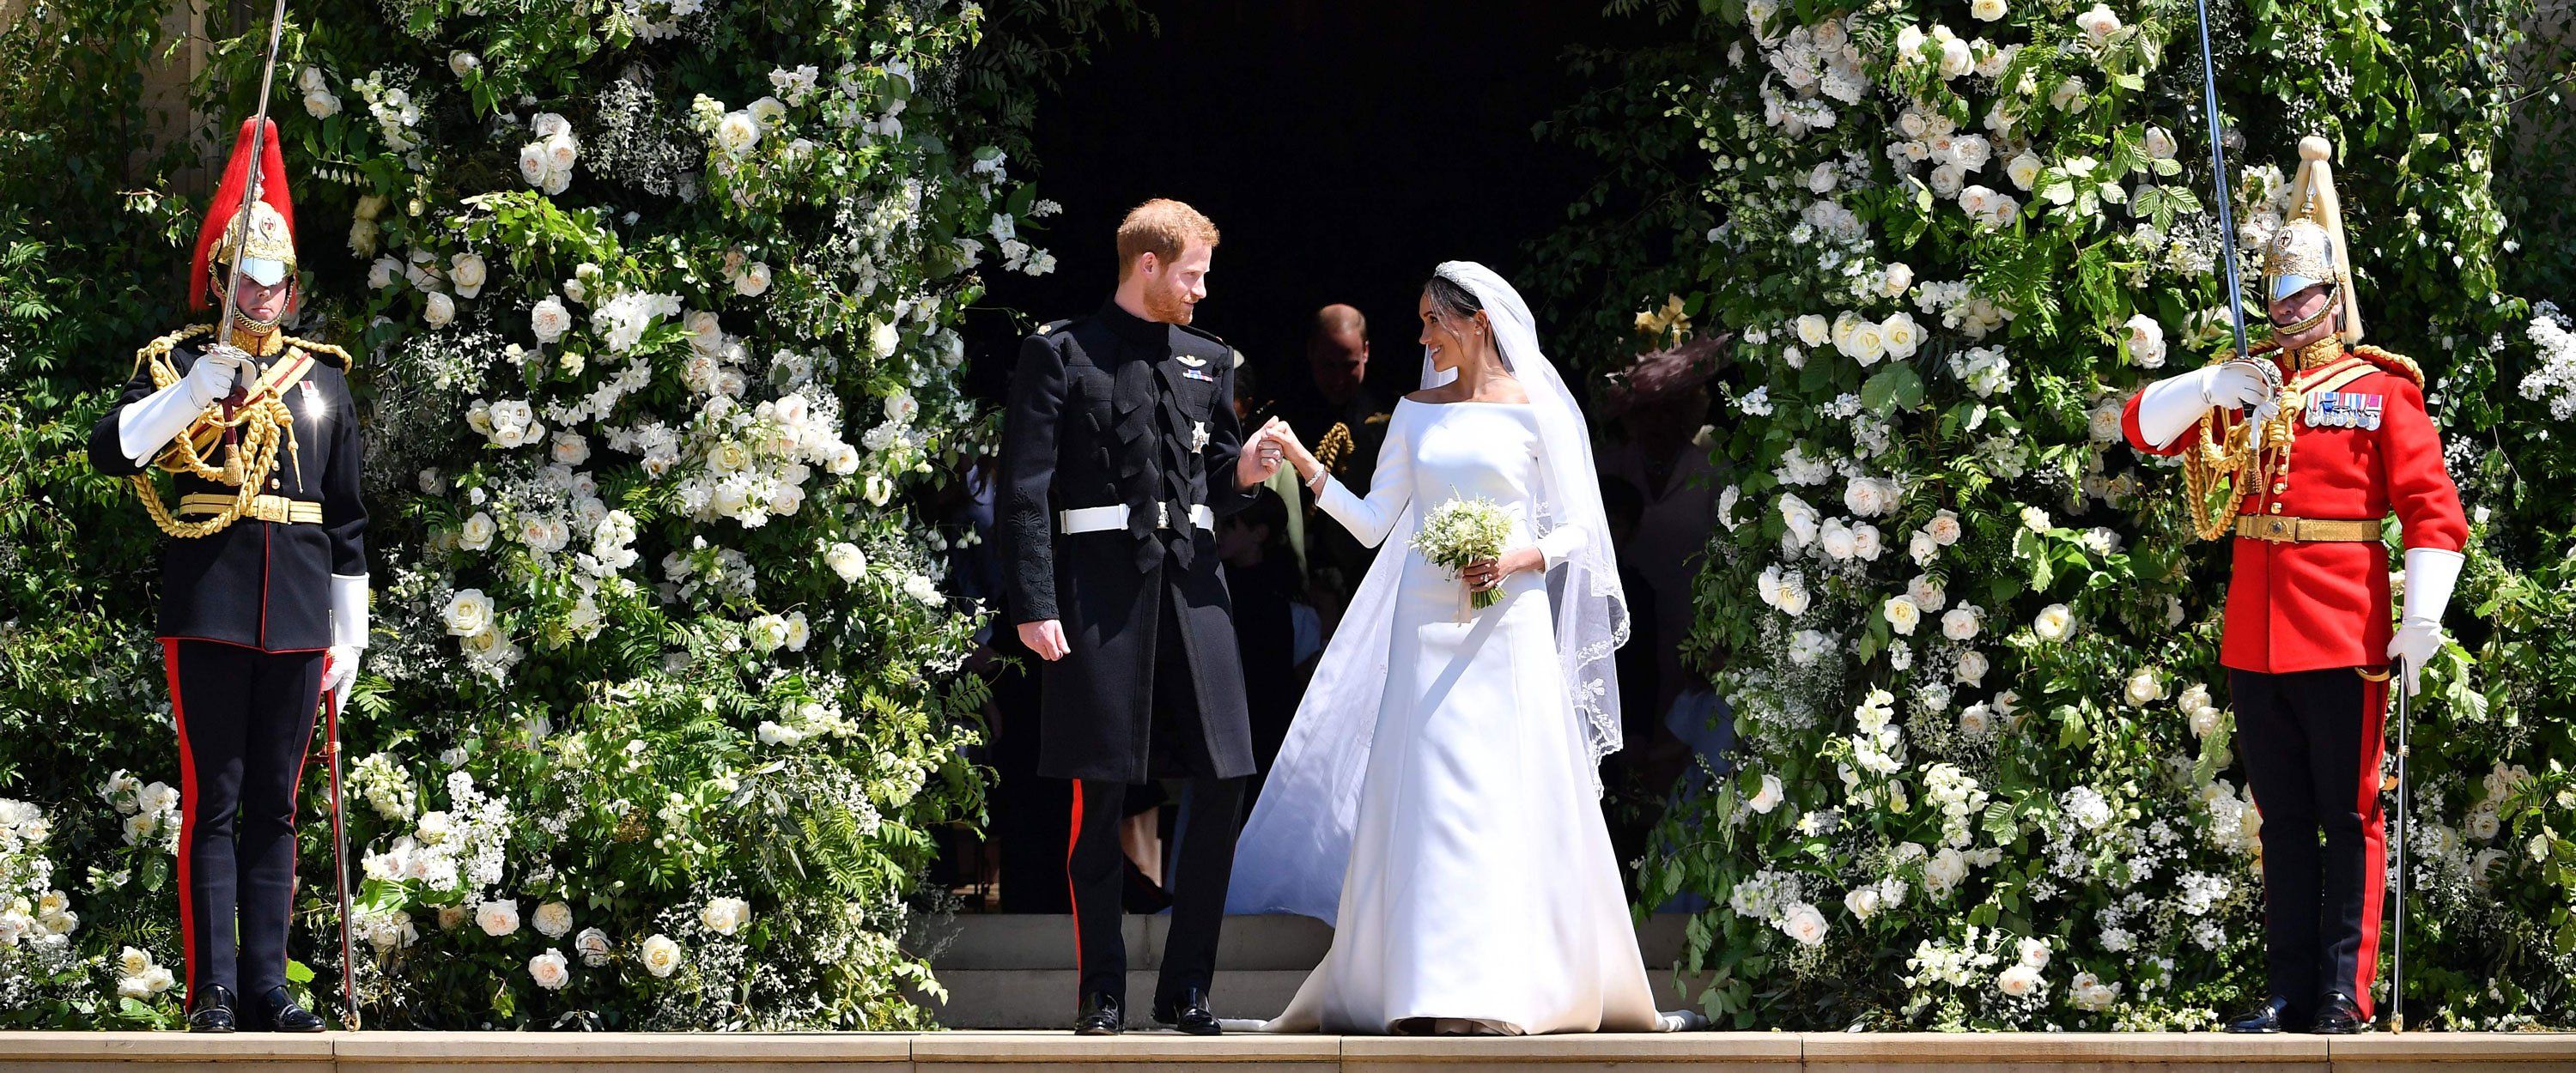 Royal Wedding: What the bride, groom and guests wore for the ceremony